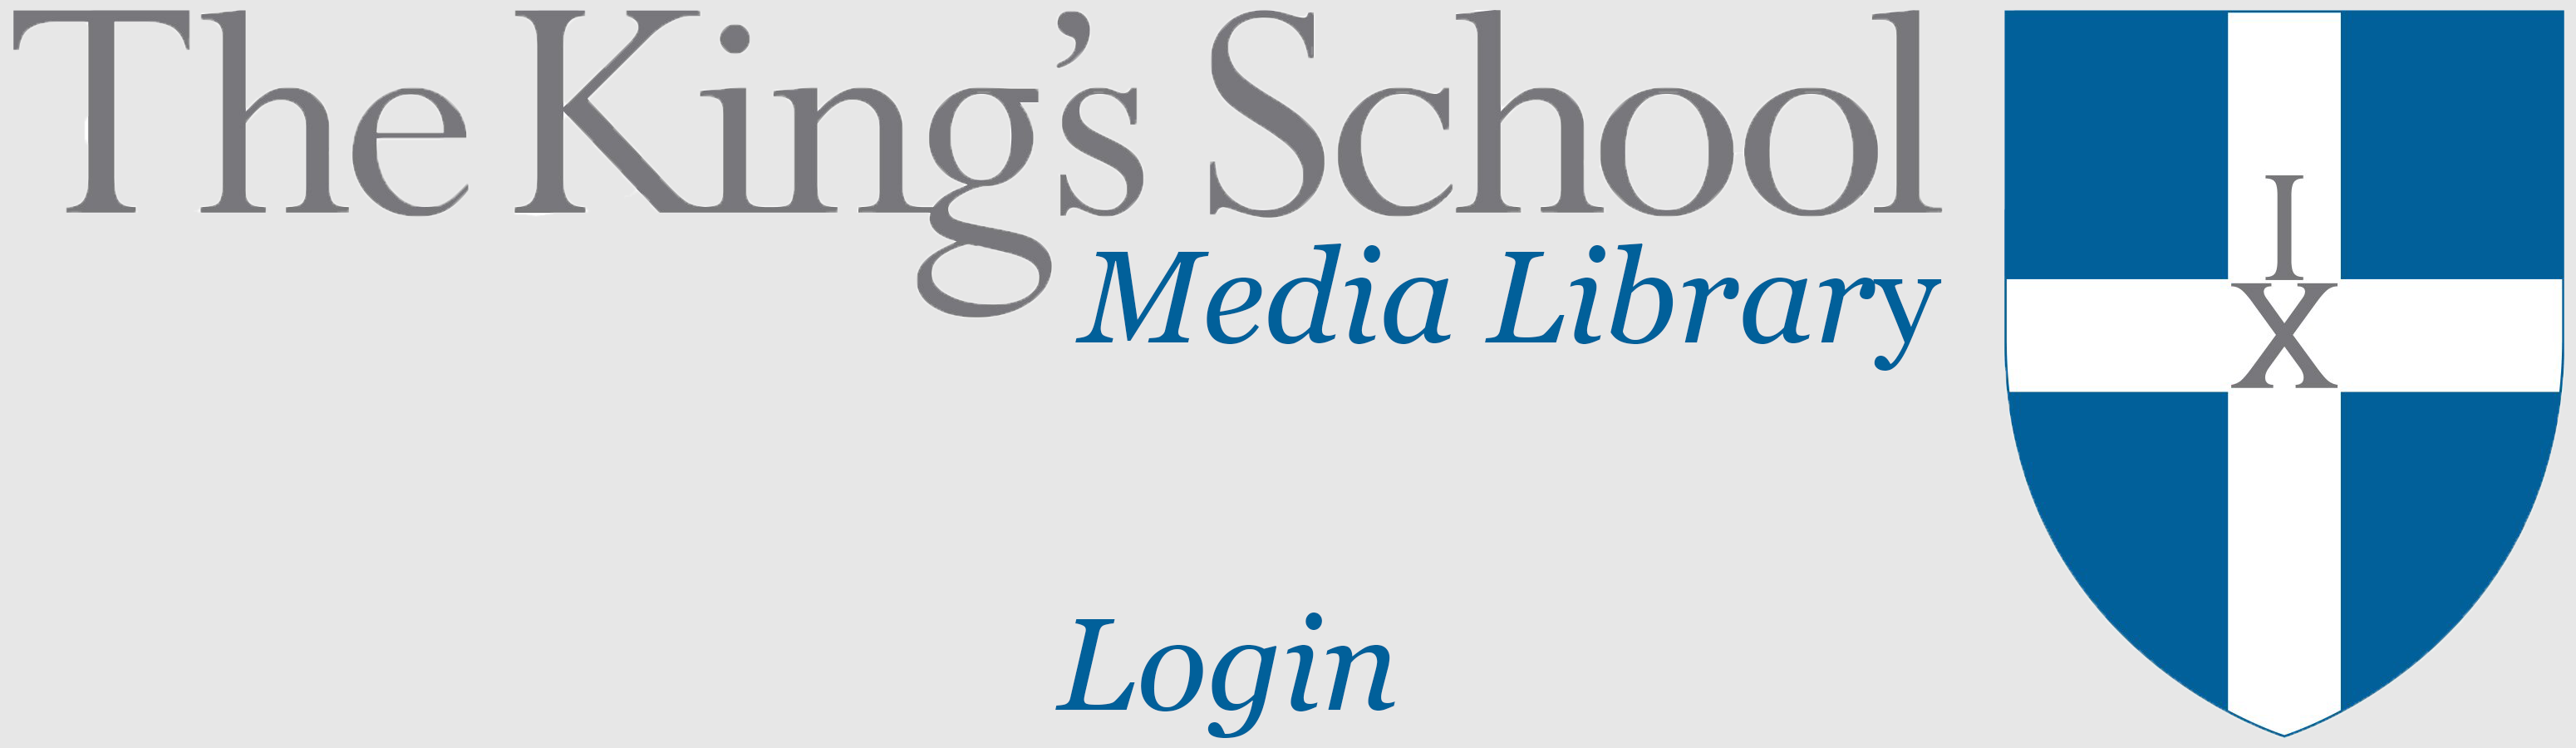  - Media Library - The King's School - Powered by Planet eStream